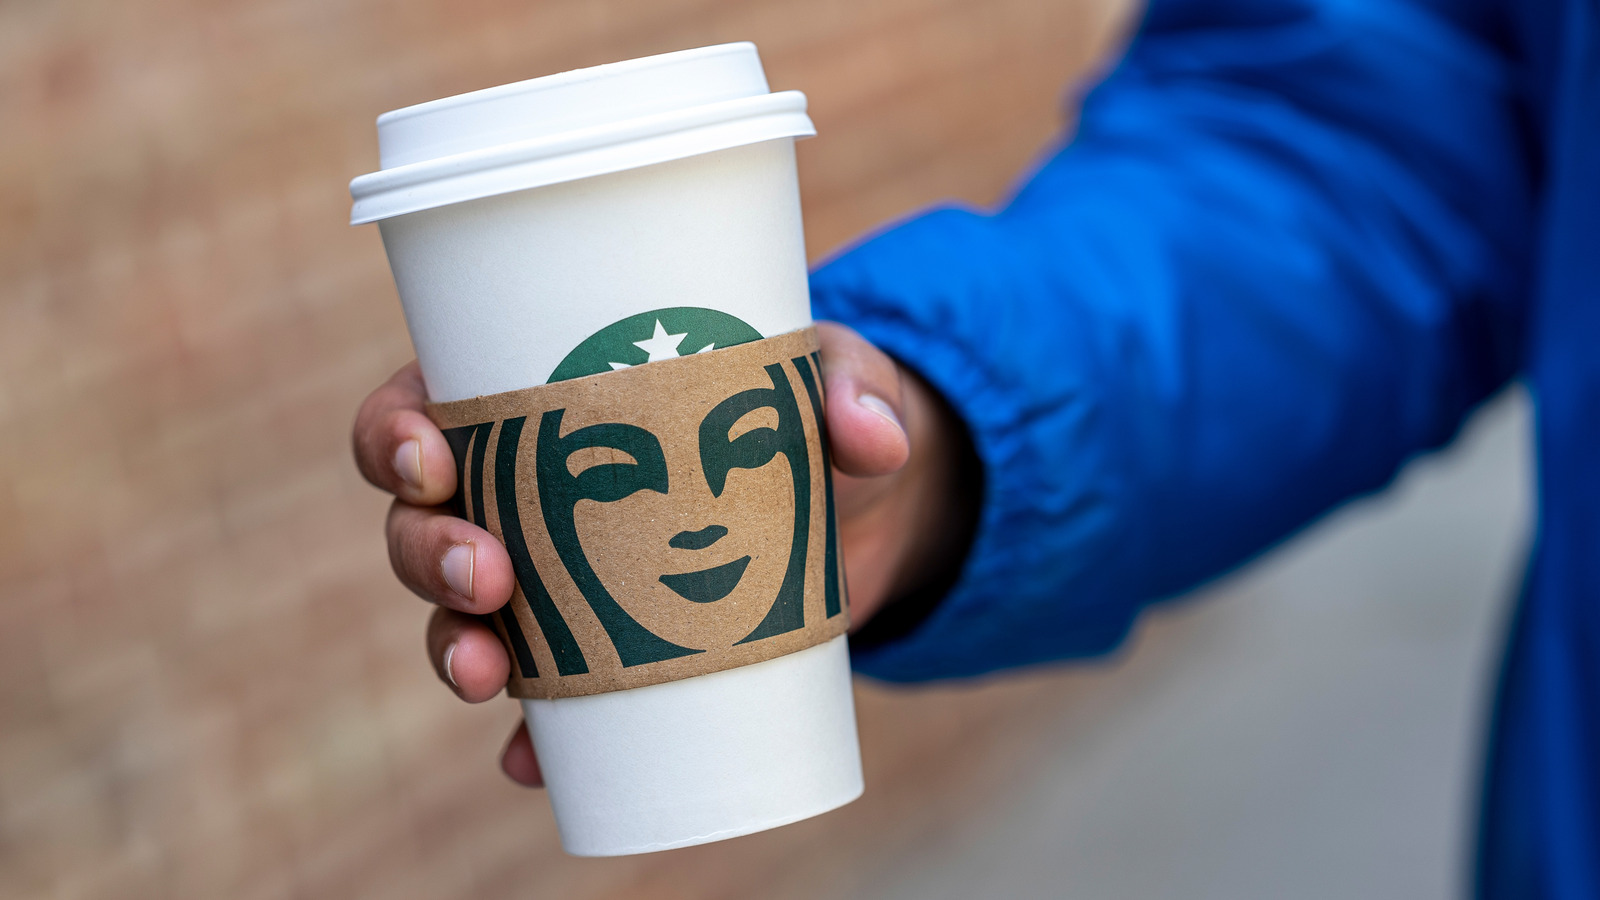 https://www.thedailymeal.com/img/gallery/starbucks-drinks-you-should-avoid-ordering-at-all-costs/l-intro-1671910533.jpg